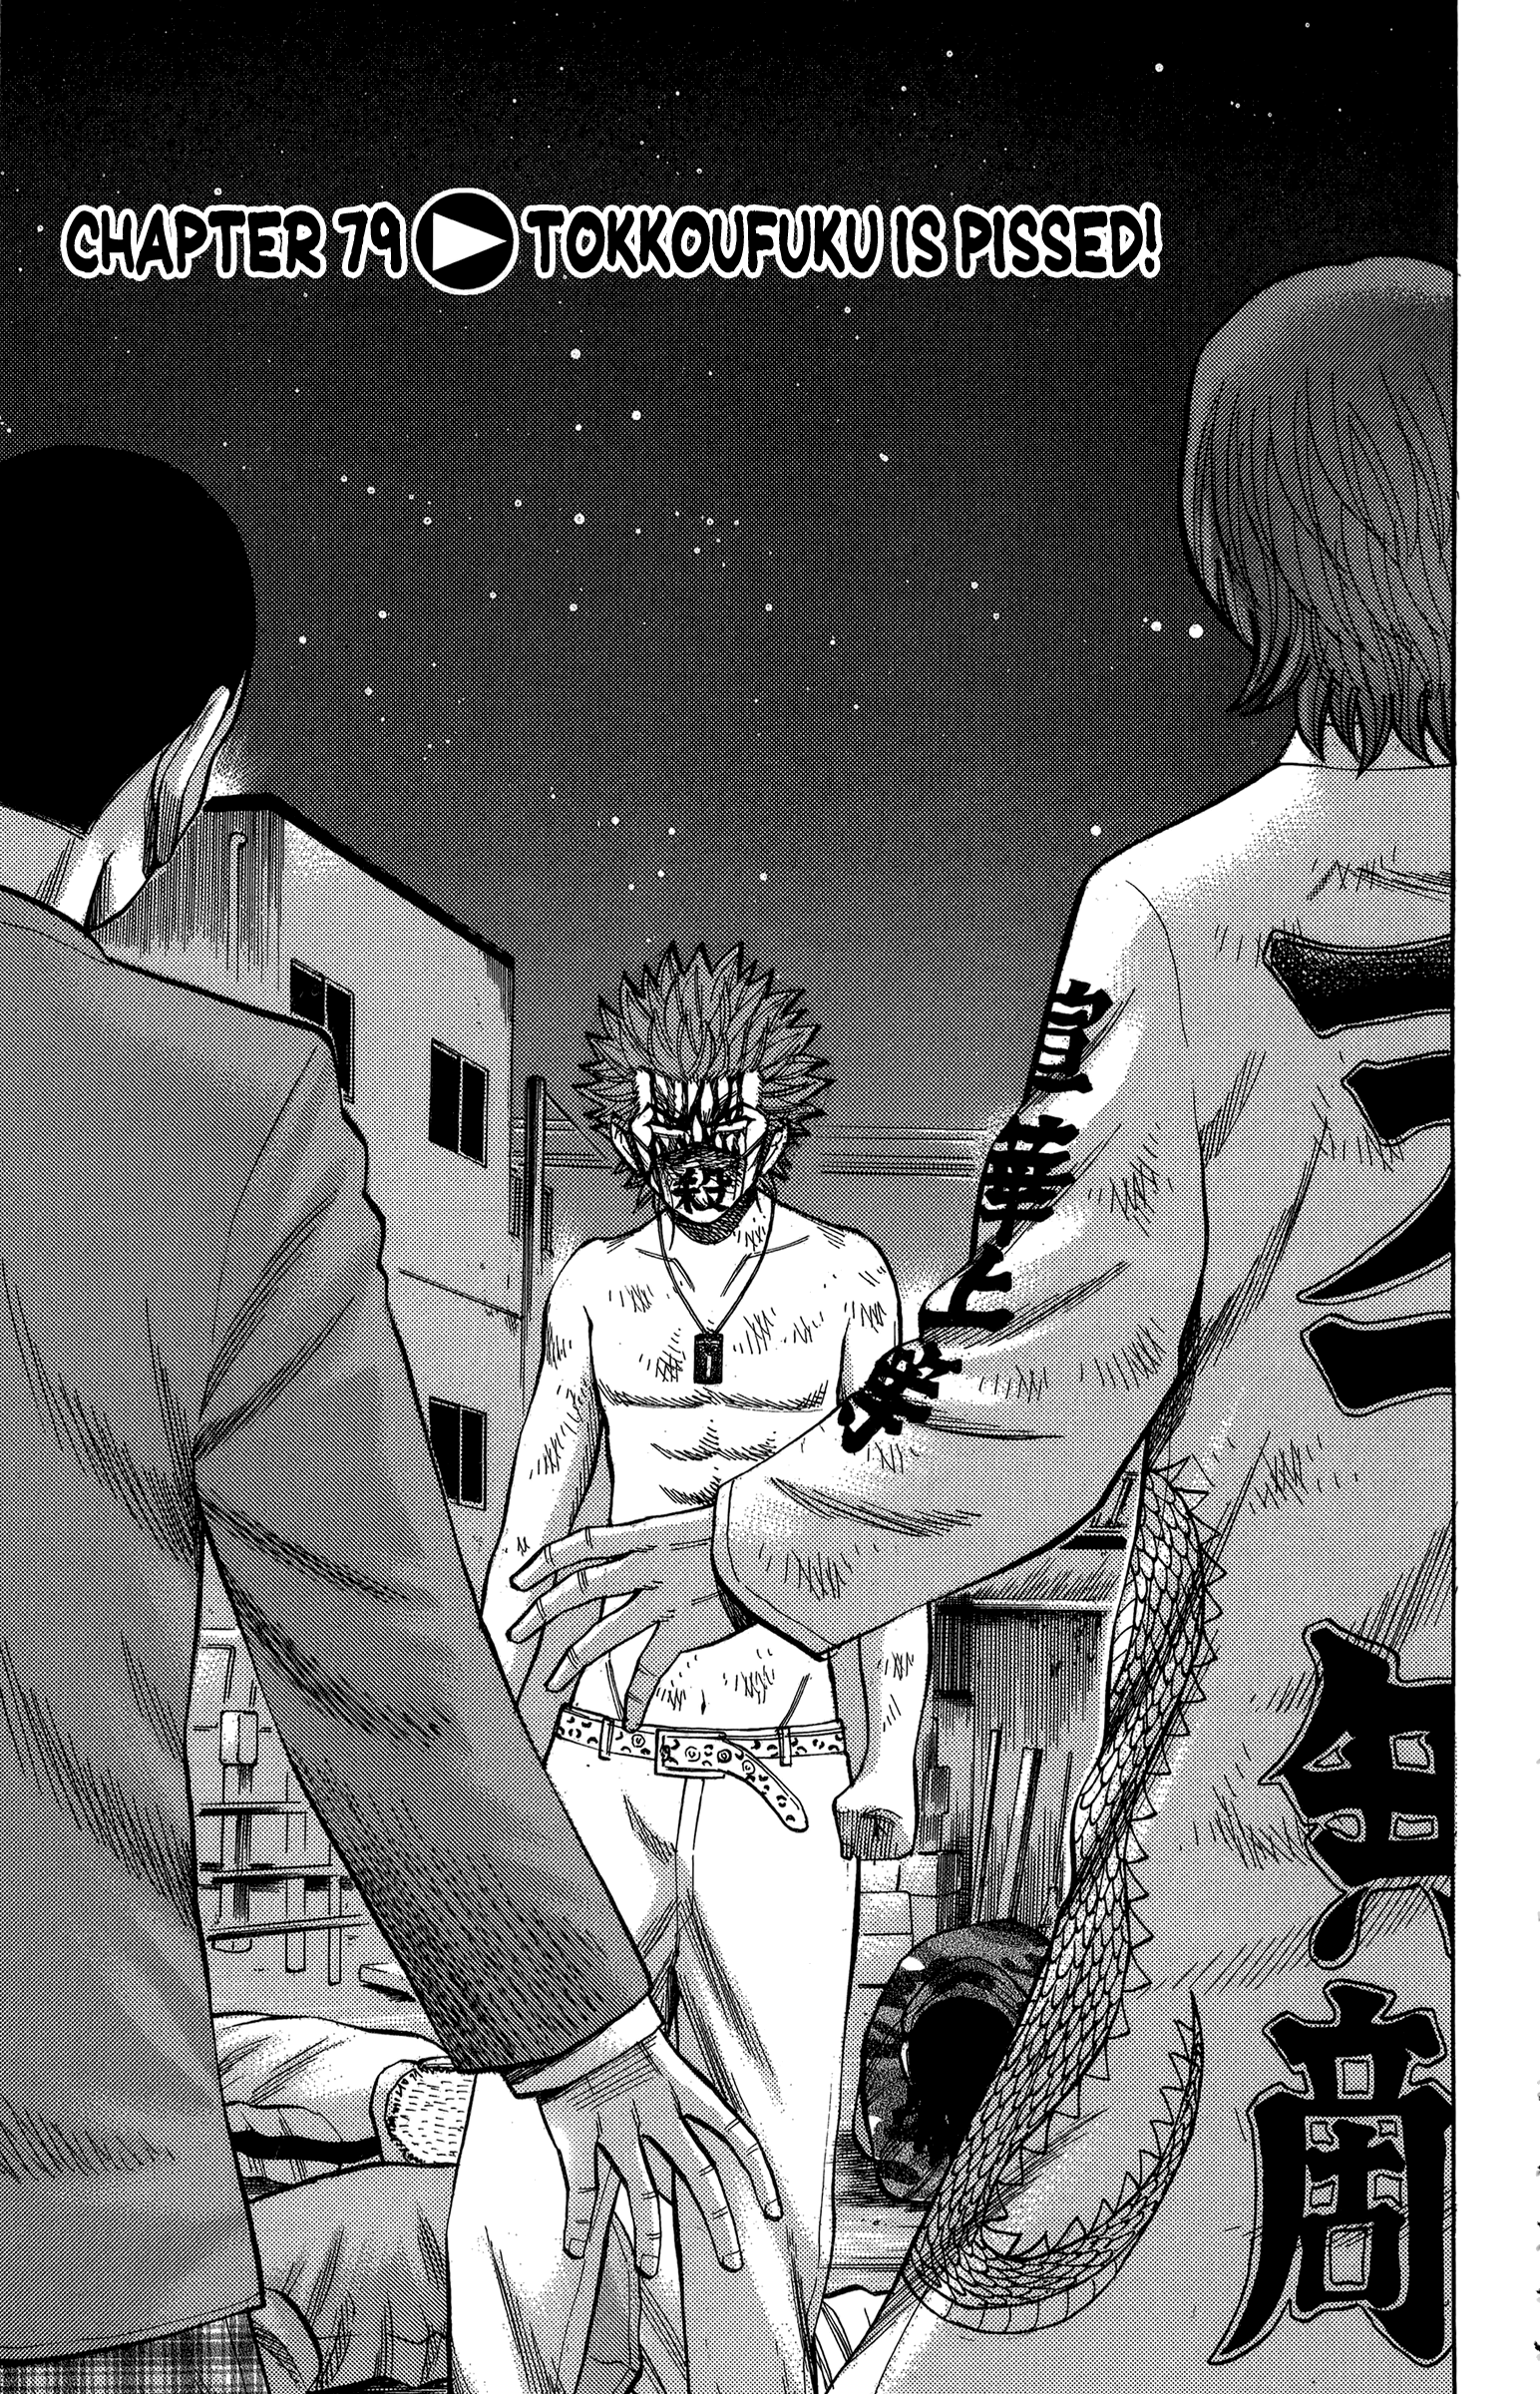 Nanba Mg5 Vol.9 Chapter 79: Tokkoufuku Is Pissed! - Picture 1